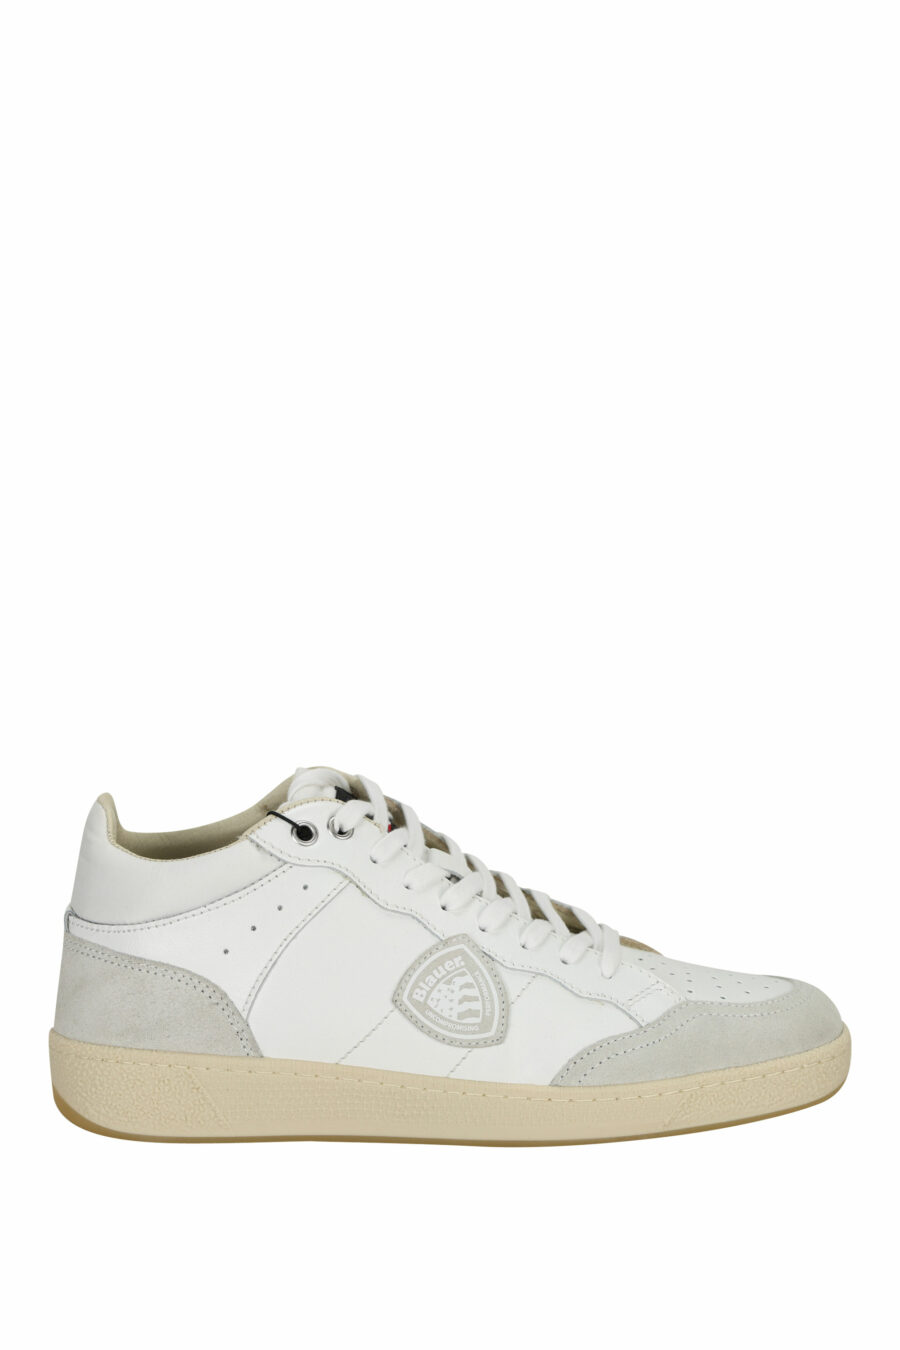 White half-high trainers with grey "murray" - 8058156546882